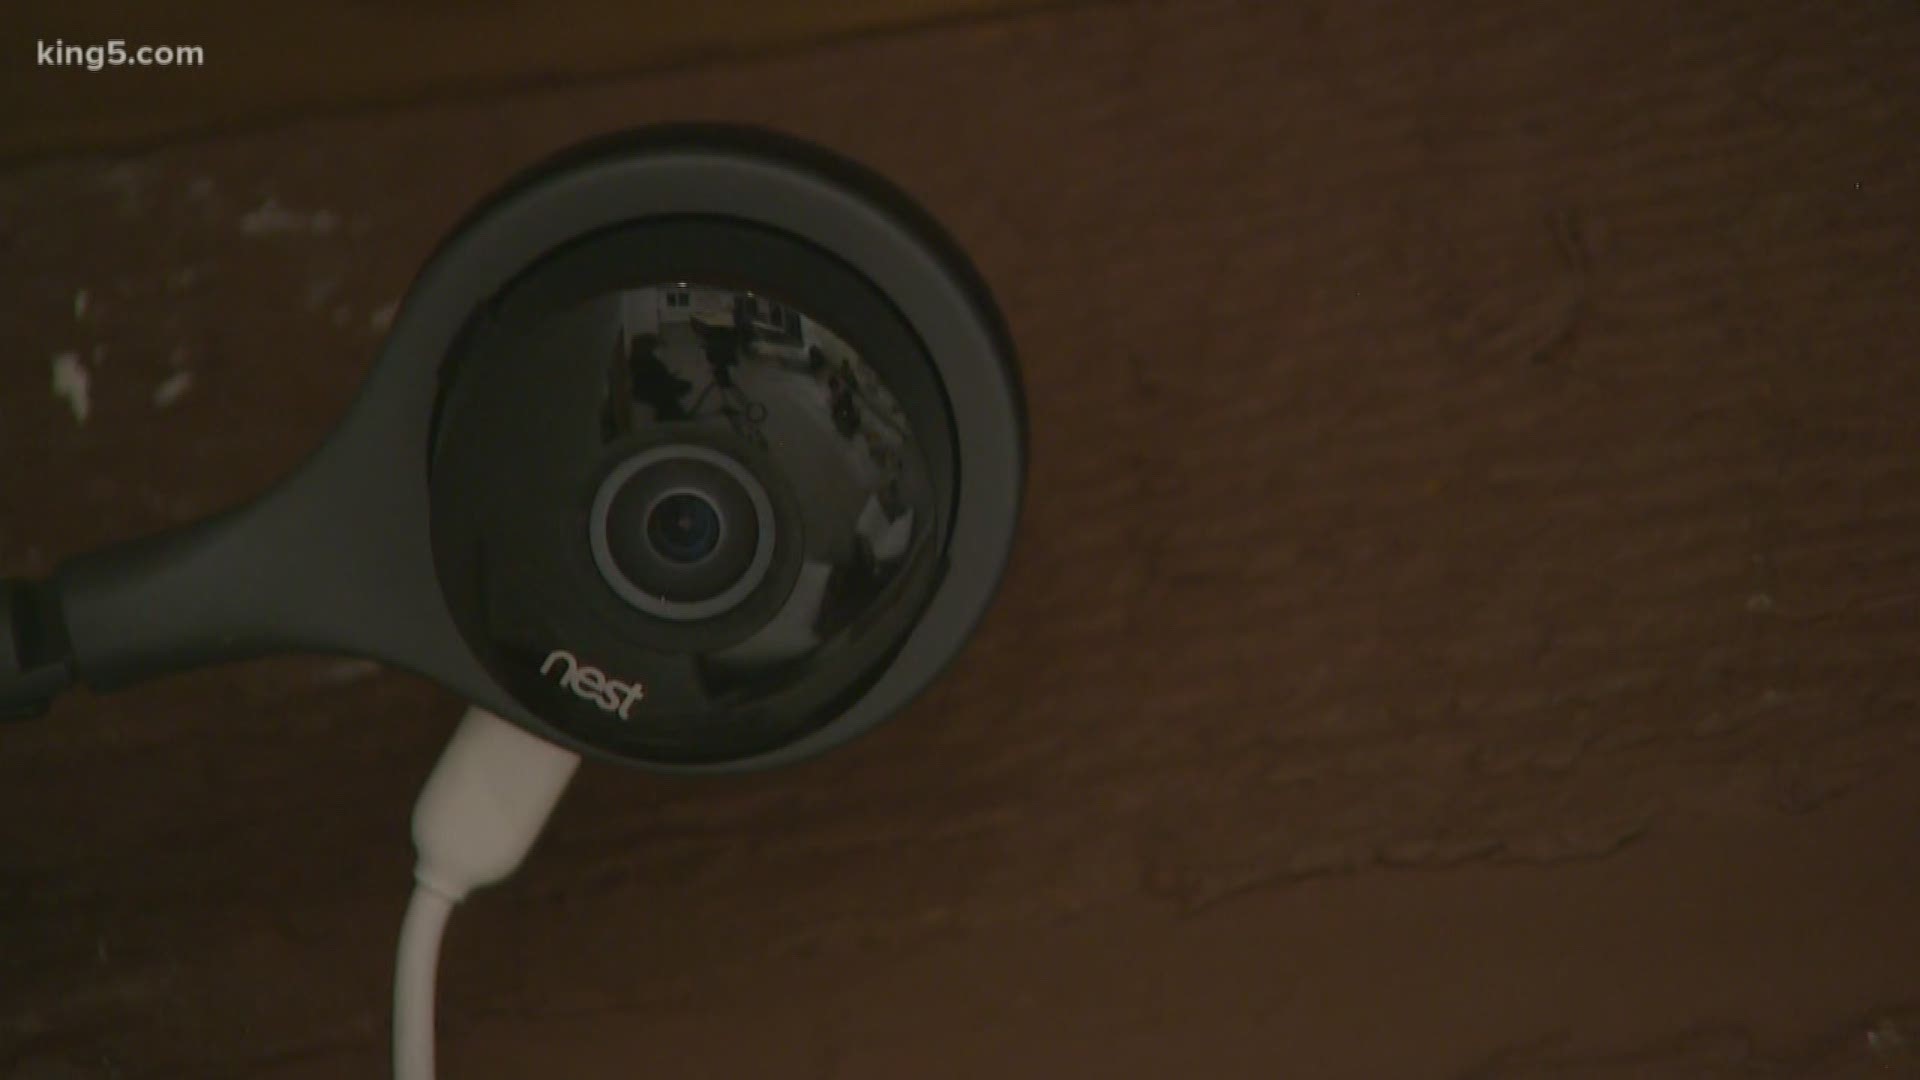 A South King County couple is on alert after someone hacked into their home security system and started watching them. Not only that, but they launched a verbal assault on the couple's children. KING 5's Jenna Hanchard has the story.